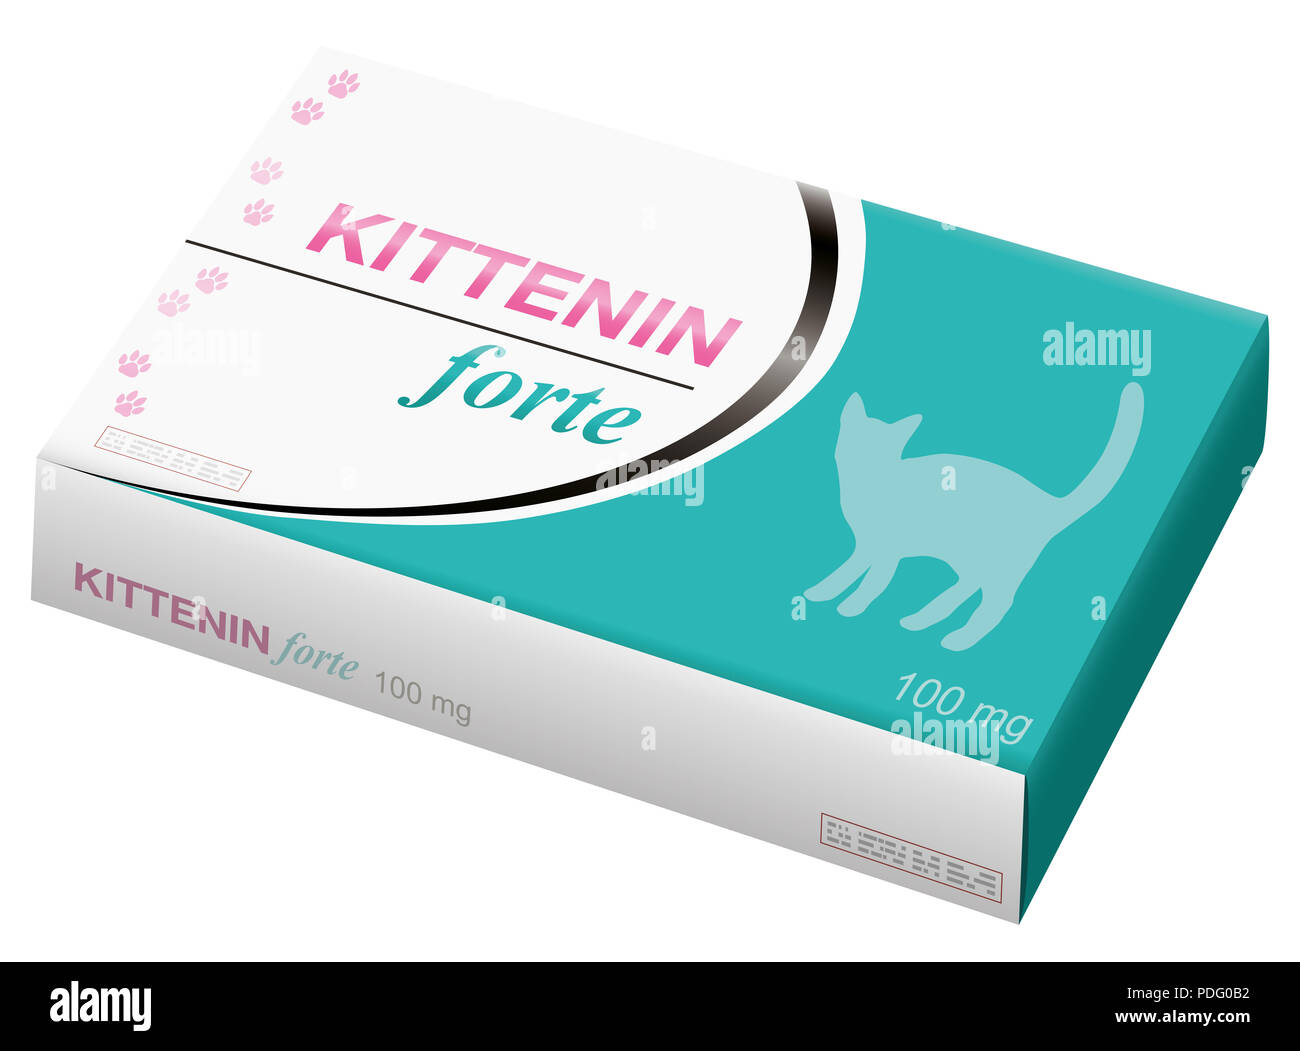 Cats medicine with silhouette and tracks of a cat. Veterinary medical fake product named KITTENIN FORTE - illustration on white backgro Stock Photo